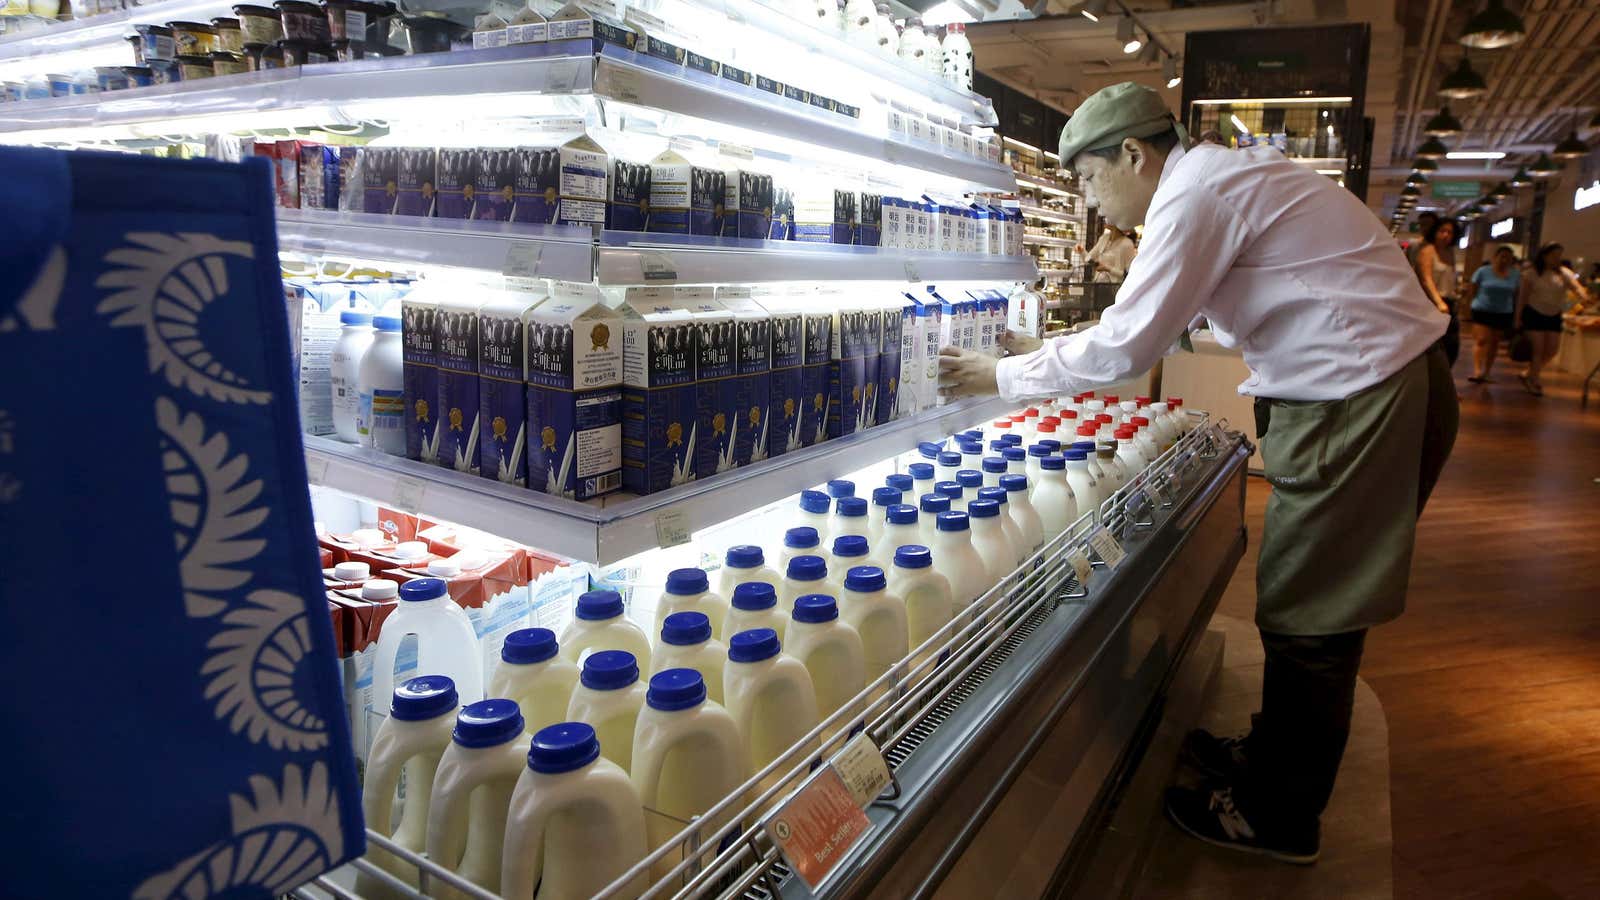 Globally, milk consumption is on the up, set to increase by 60% in the next three decades.